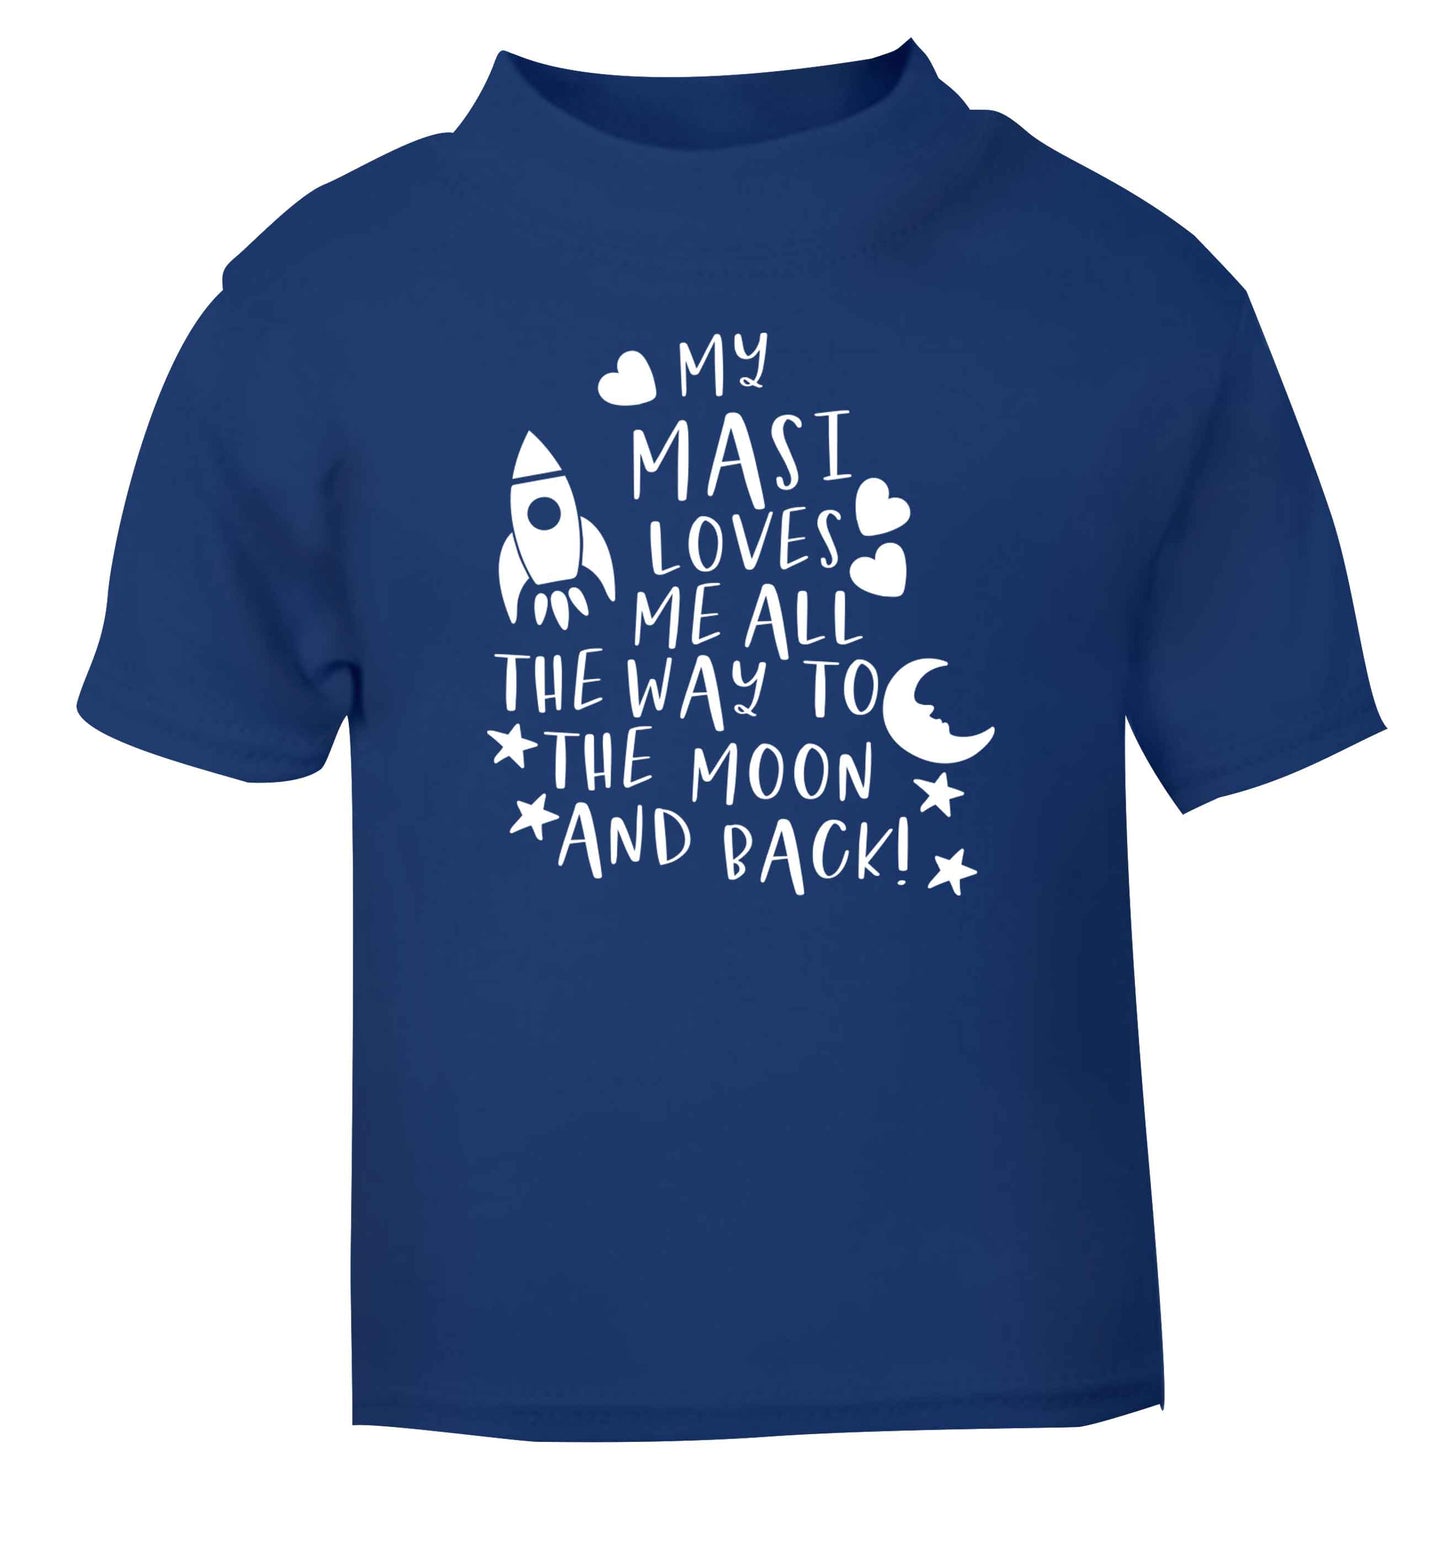 My masi loves me all the way to the moon and back blue Baby Toddler Tshirt 2 Years